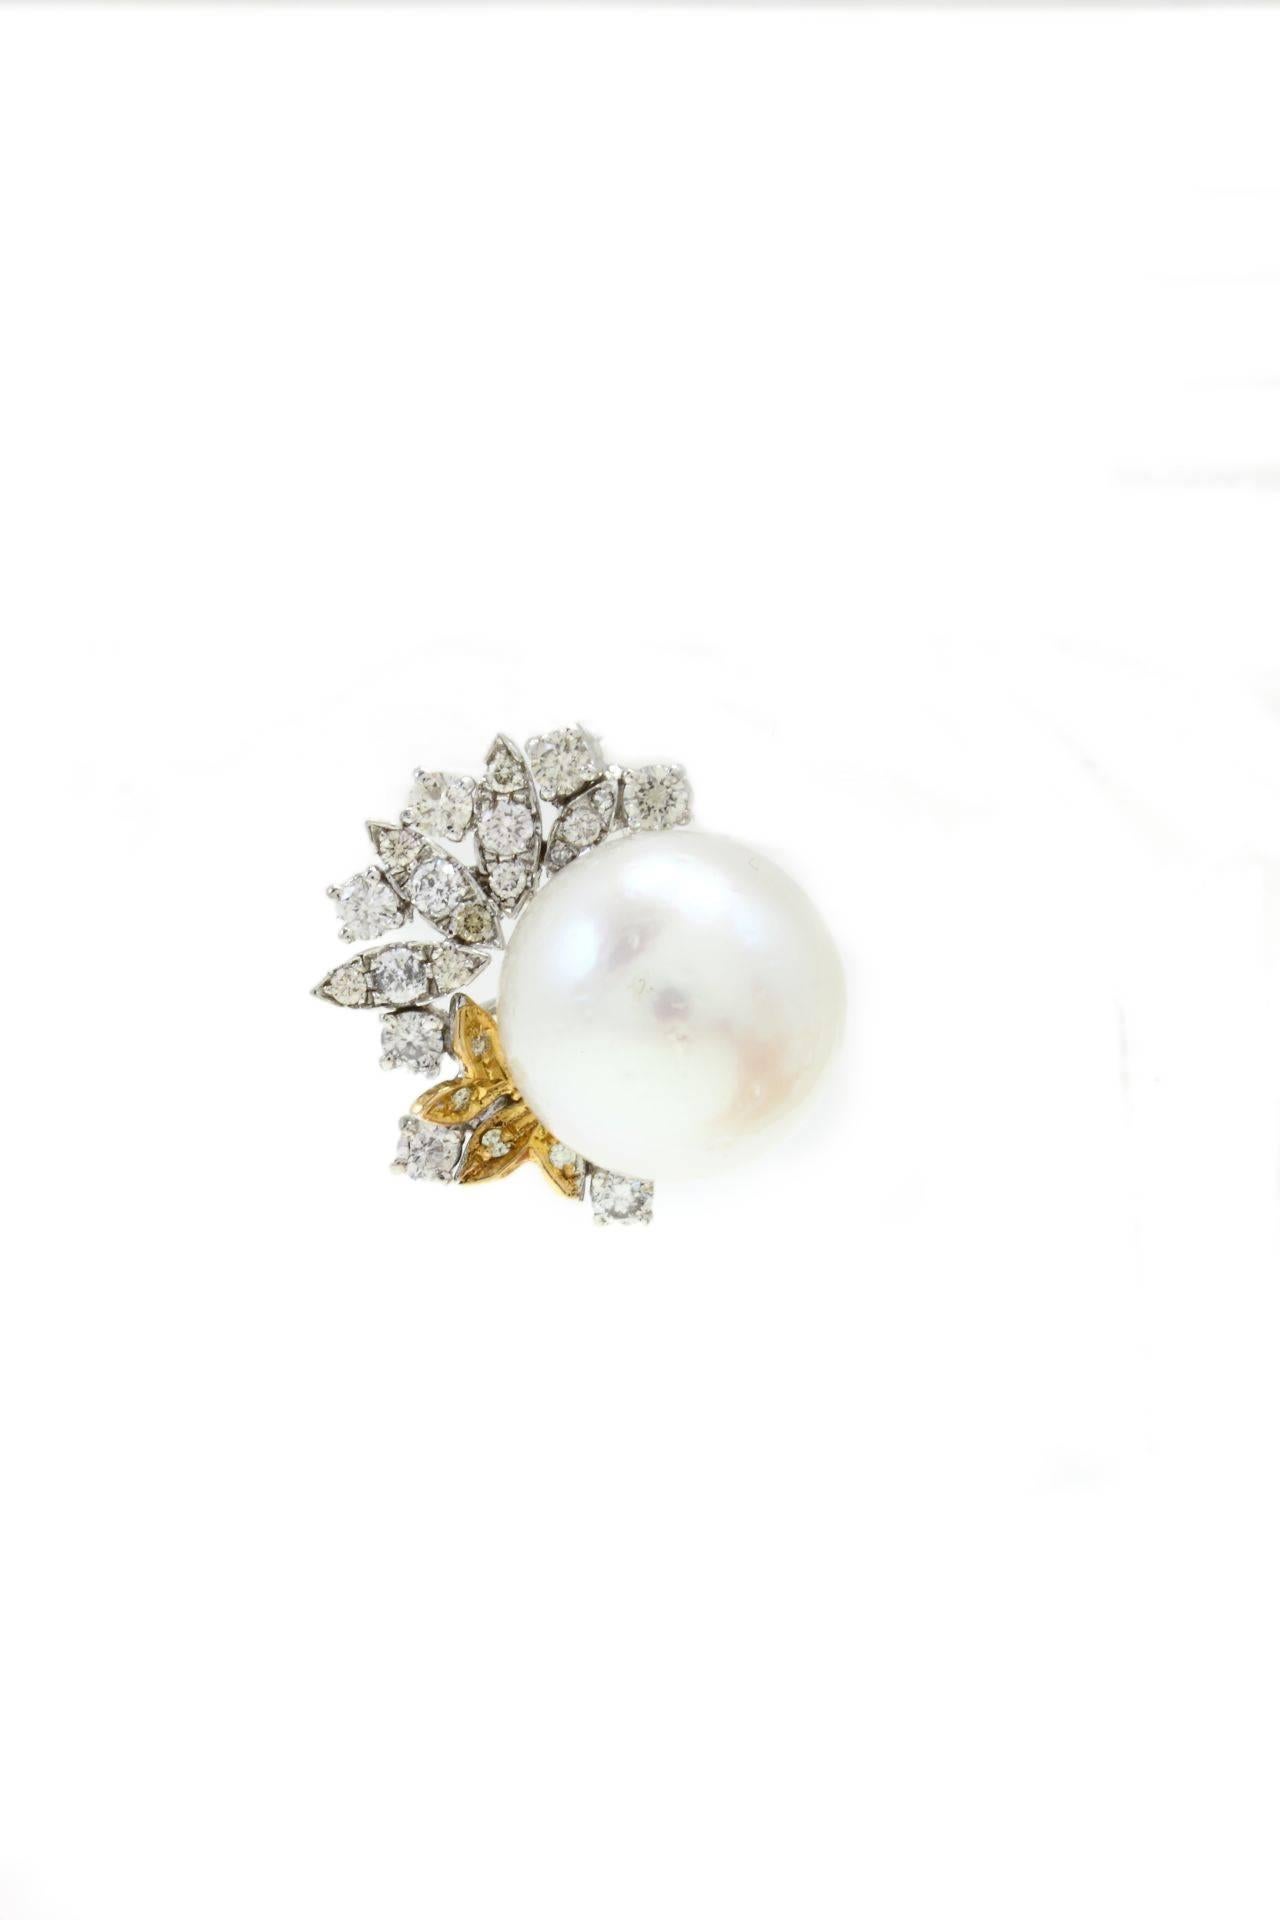 Elegant earrings in 14Kt yellow gold and 14Kt  white gold composed of a medium size pearl surrounded by leaves of diamonds. All together together make up a delightful pairs of earrings that you will not resist to wear.

diamonds(1.80Kt) 
Pearls